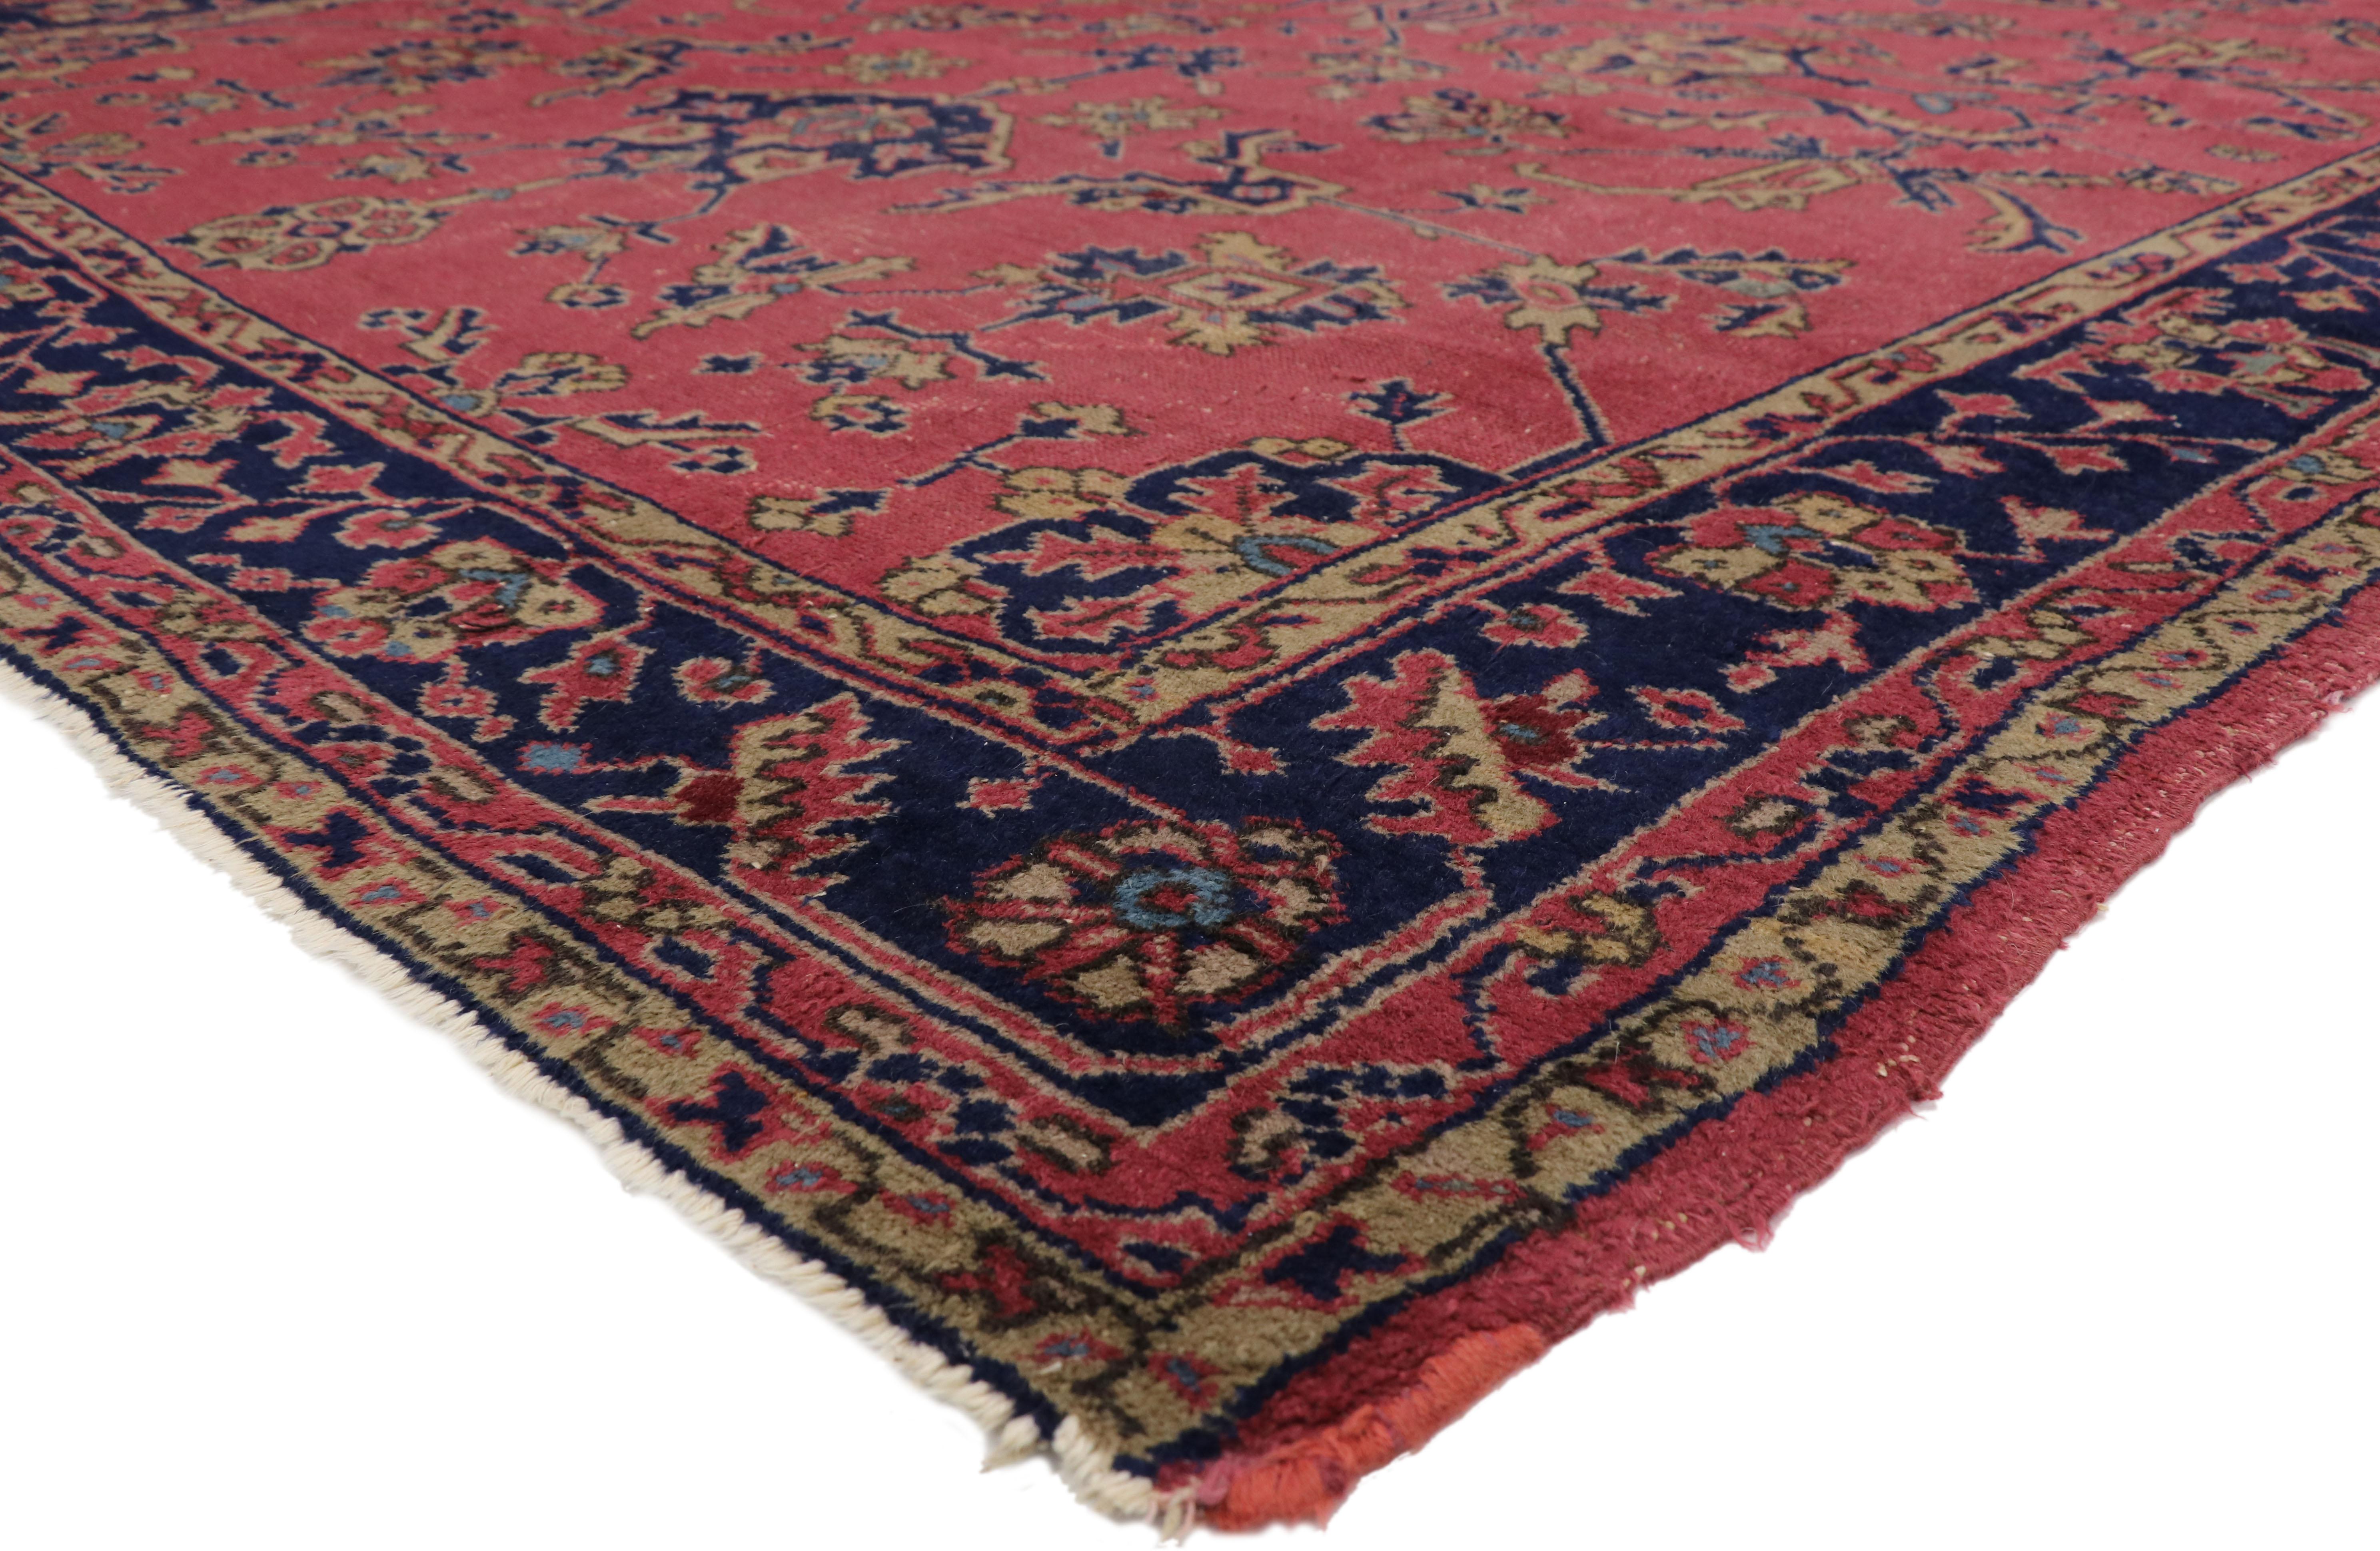 77365, distressed antique Turkish Sparta rug with Industrial Romantic Venetian style 09'05 x 11'07. Ravishing and vibrant this hand knotted wool distressed antique Turkish Sparta rug features an all-over pattern on a rosy rouge backdrop. Splayed